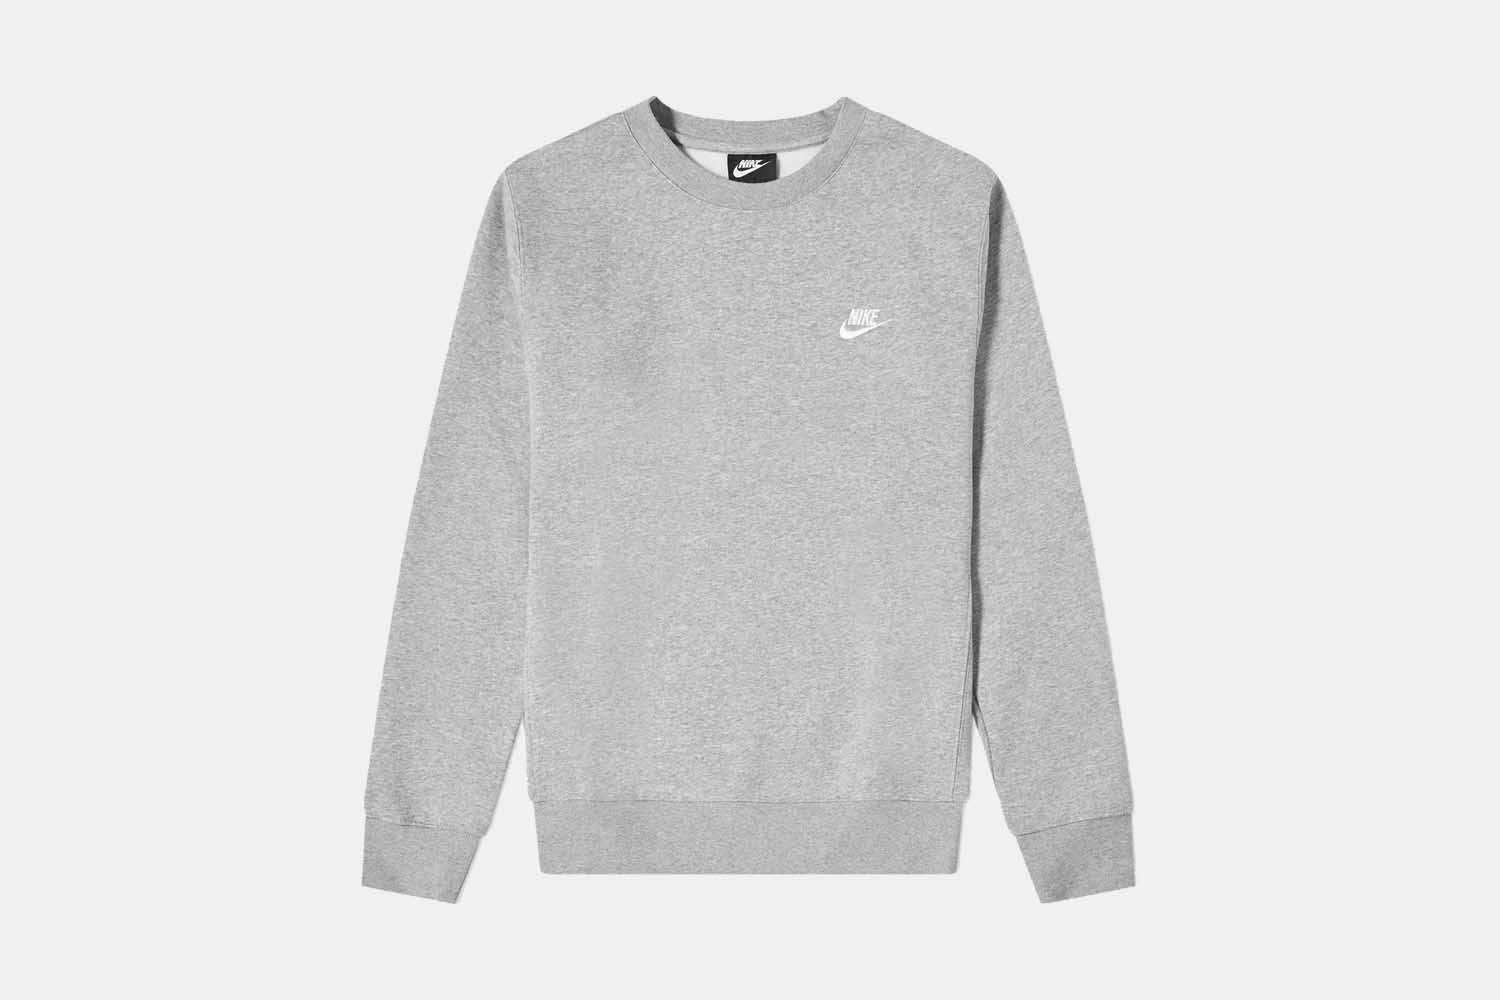 Deal: This Classic Nike Club Crew Sweatshirt Is 20% Off